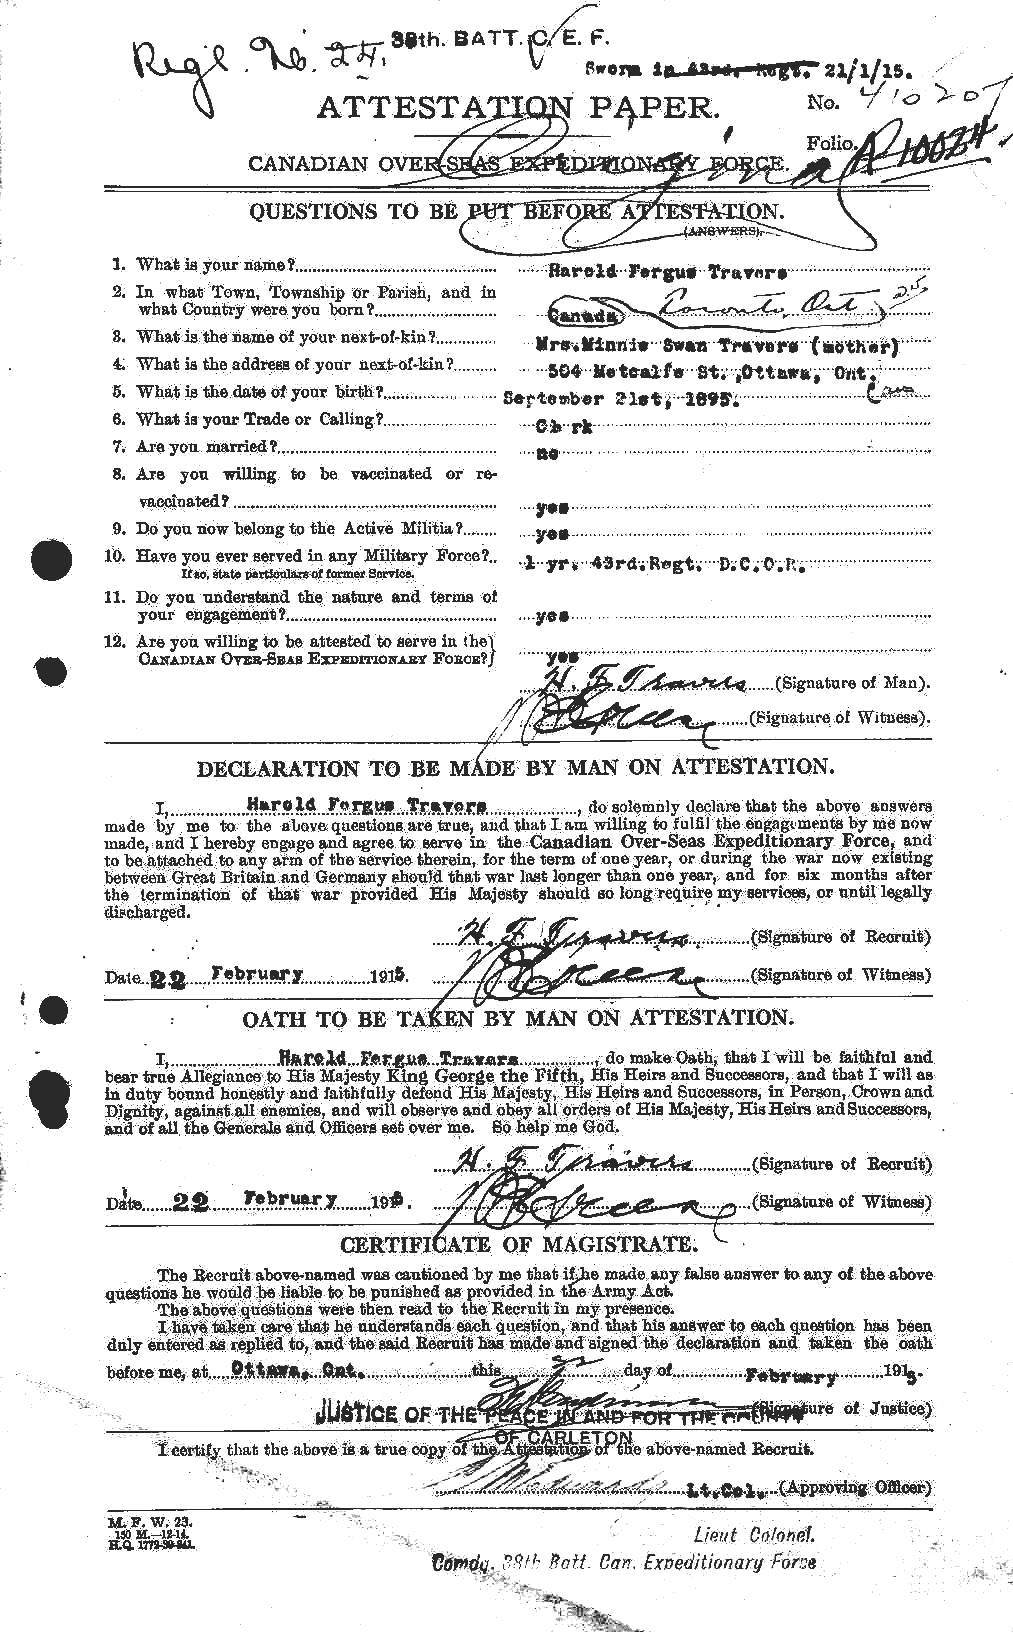 Personnel Records of the First World War - CEF 638702a